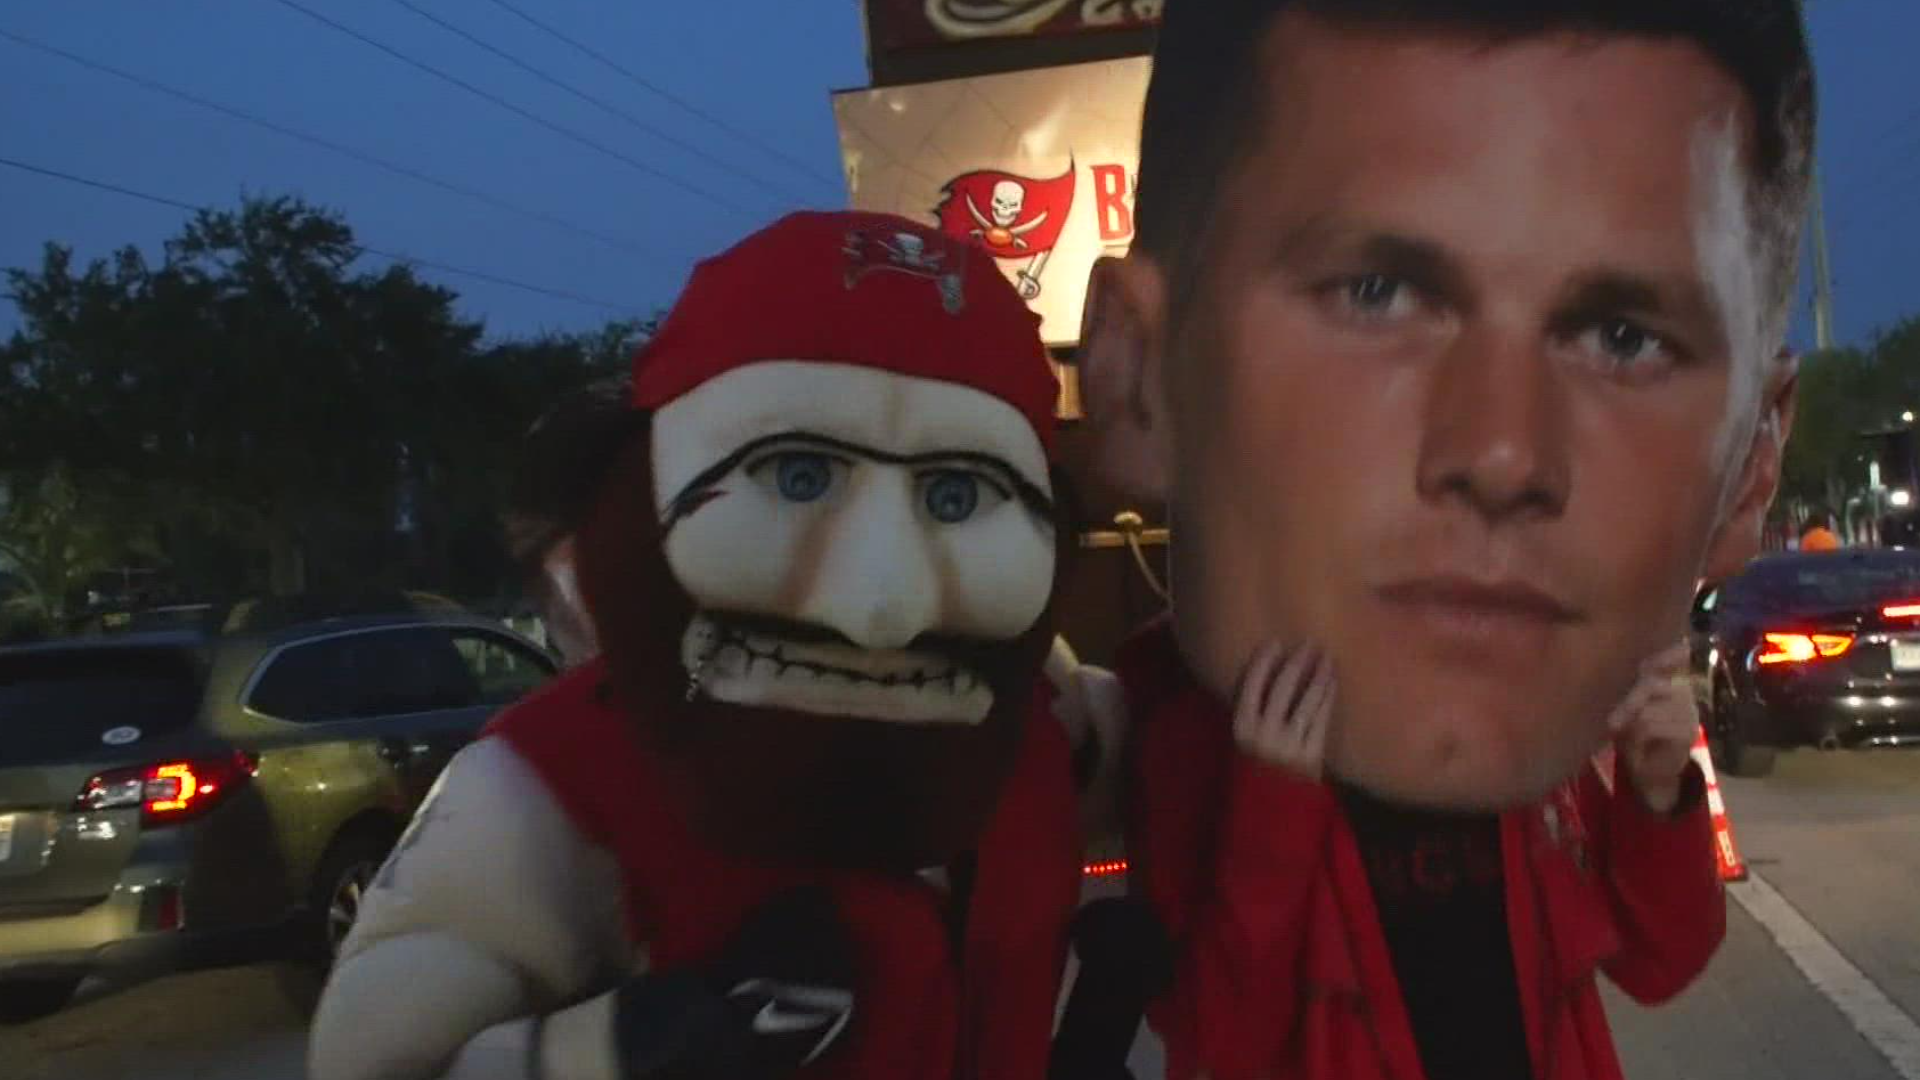 The drive-through event featured Bucs cheerleaders, Captain Fear, the Buc Beat Line and more.